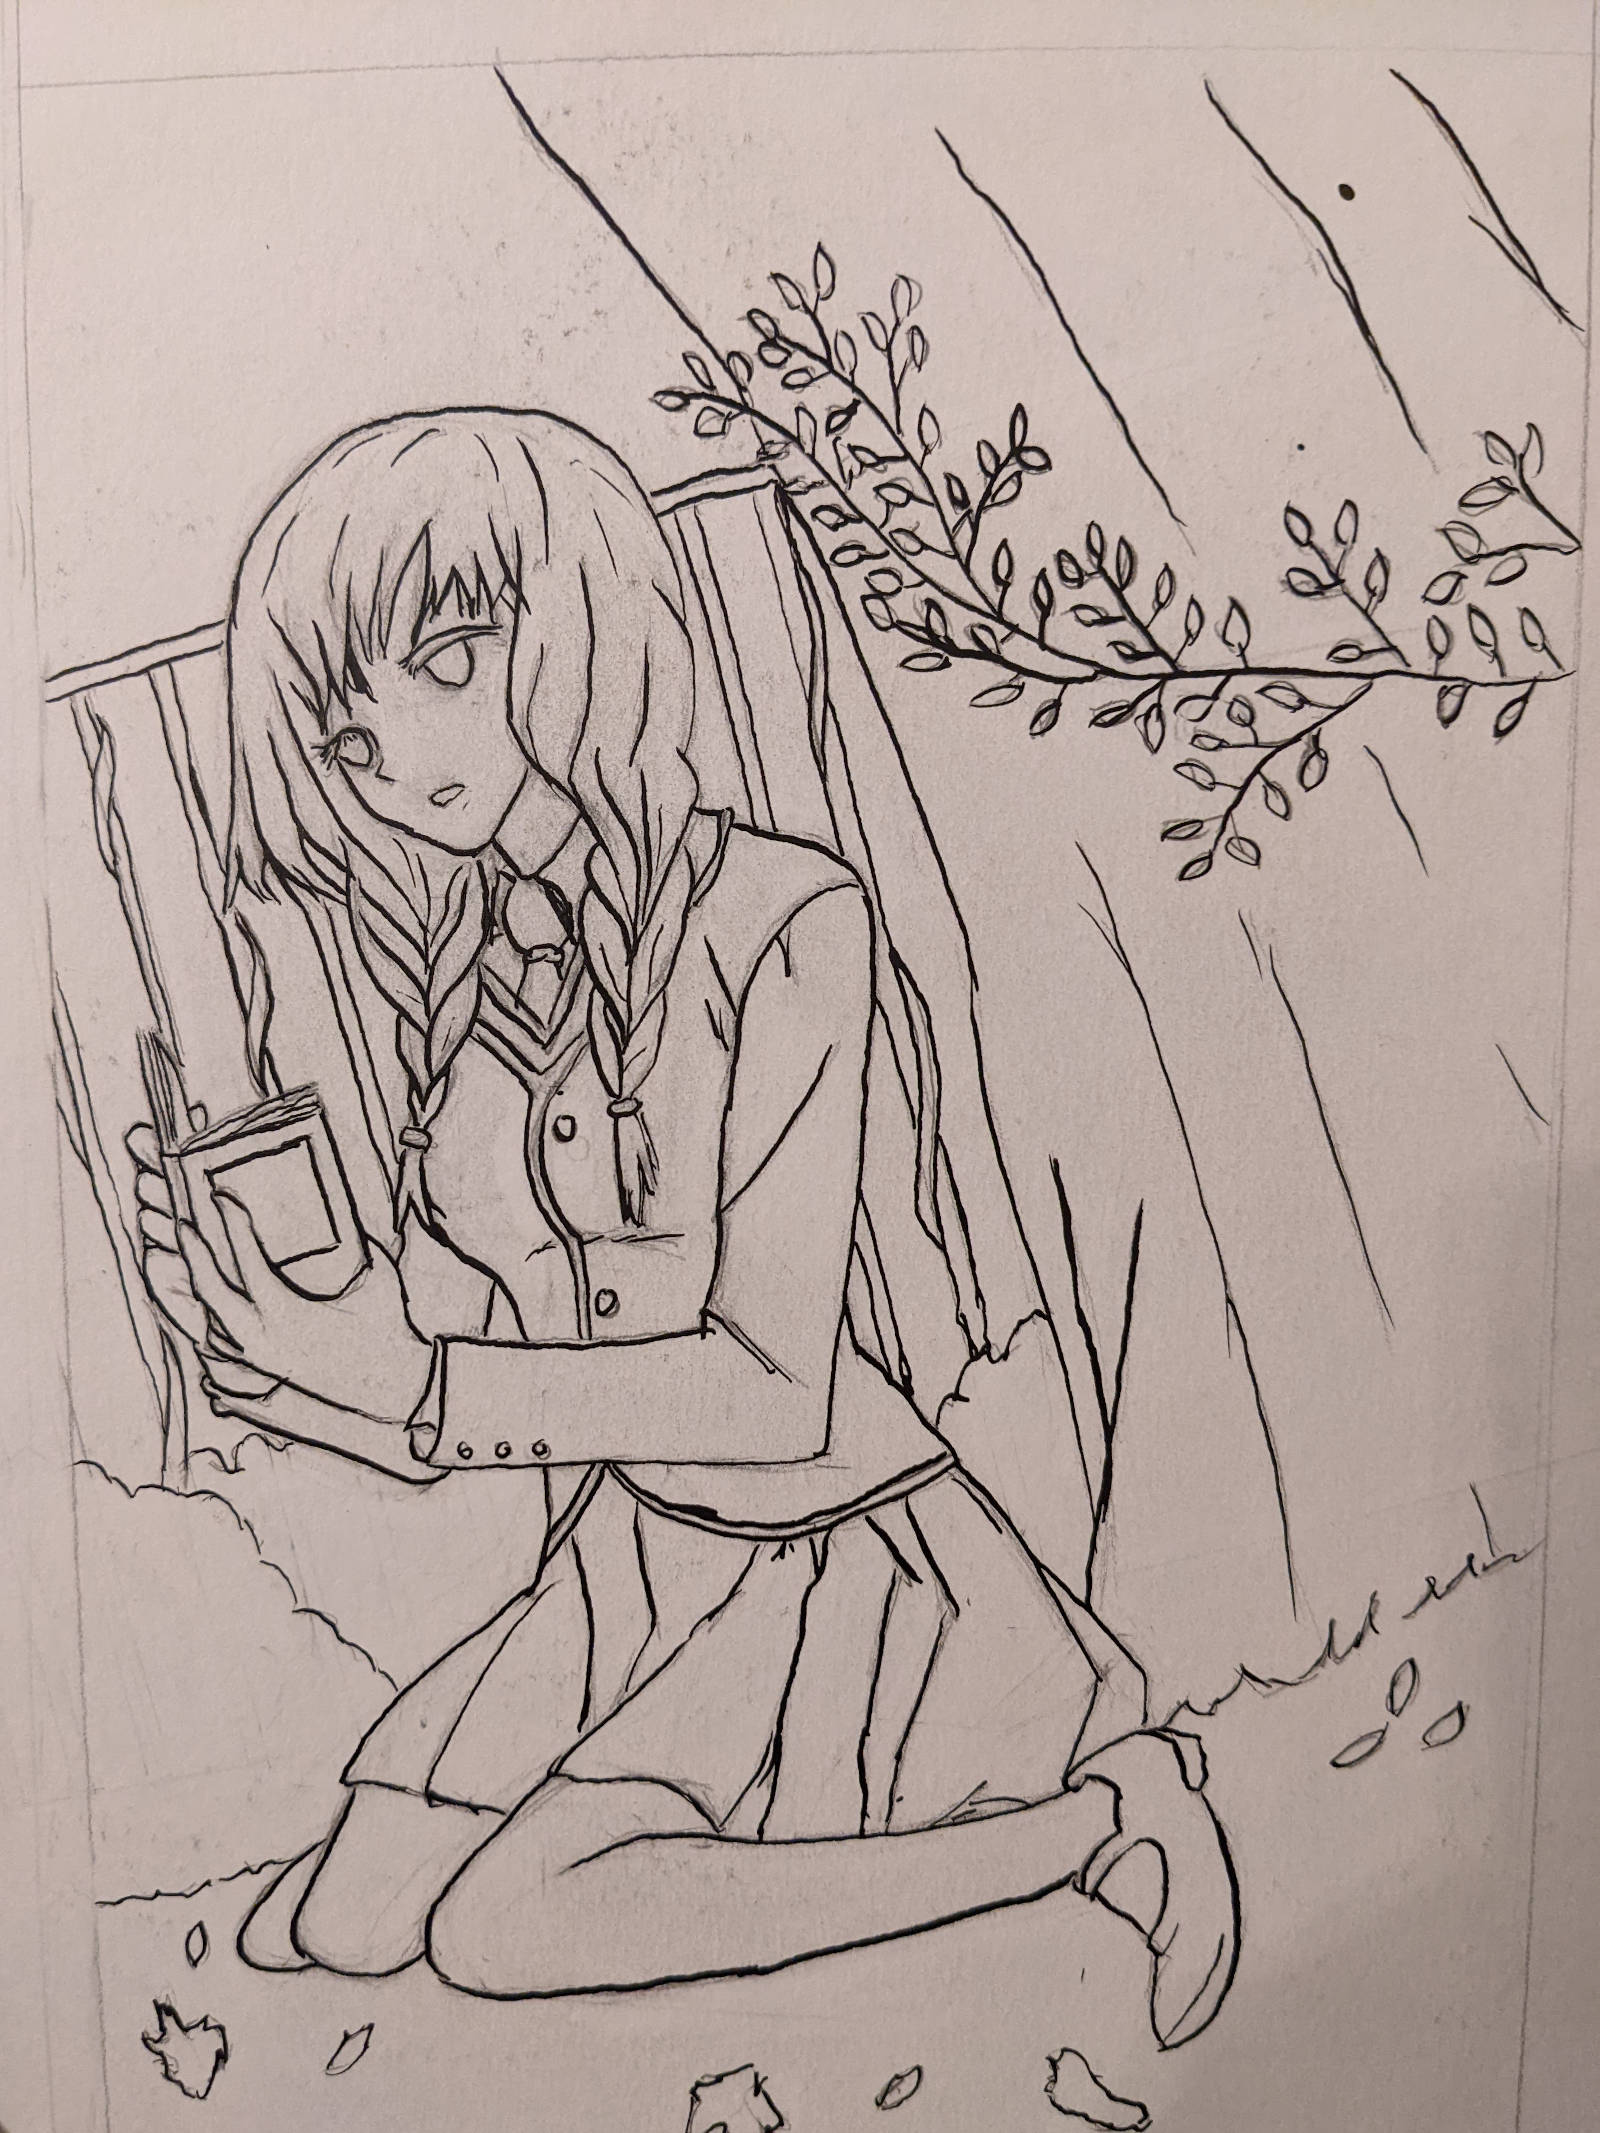 Girl with blazer and a skirt sitting in front of bushes and a fence. A tree is next to her. She is reading a diary. Black and white.